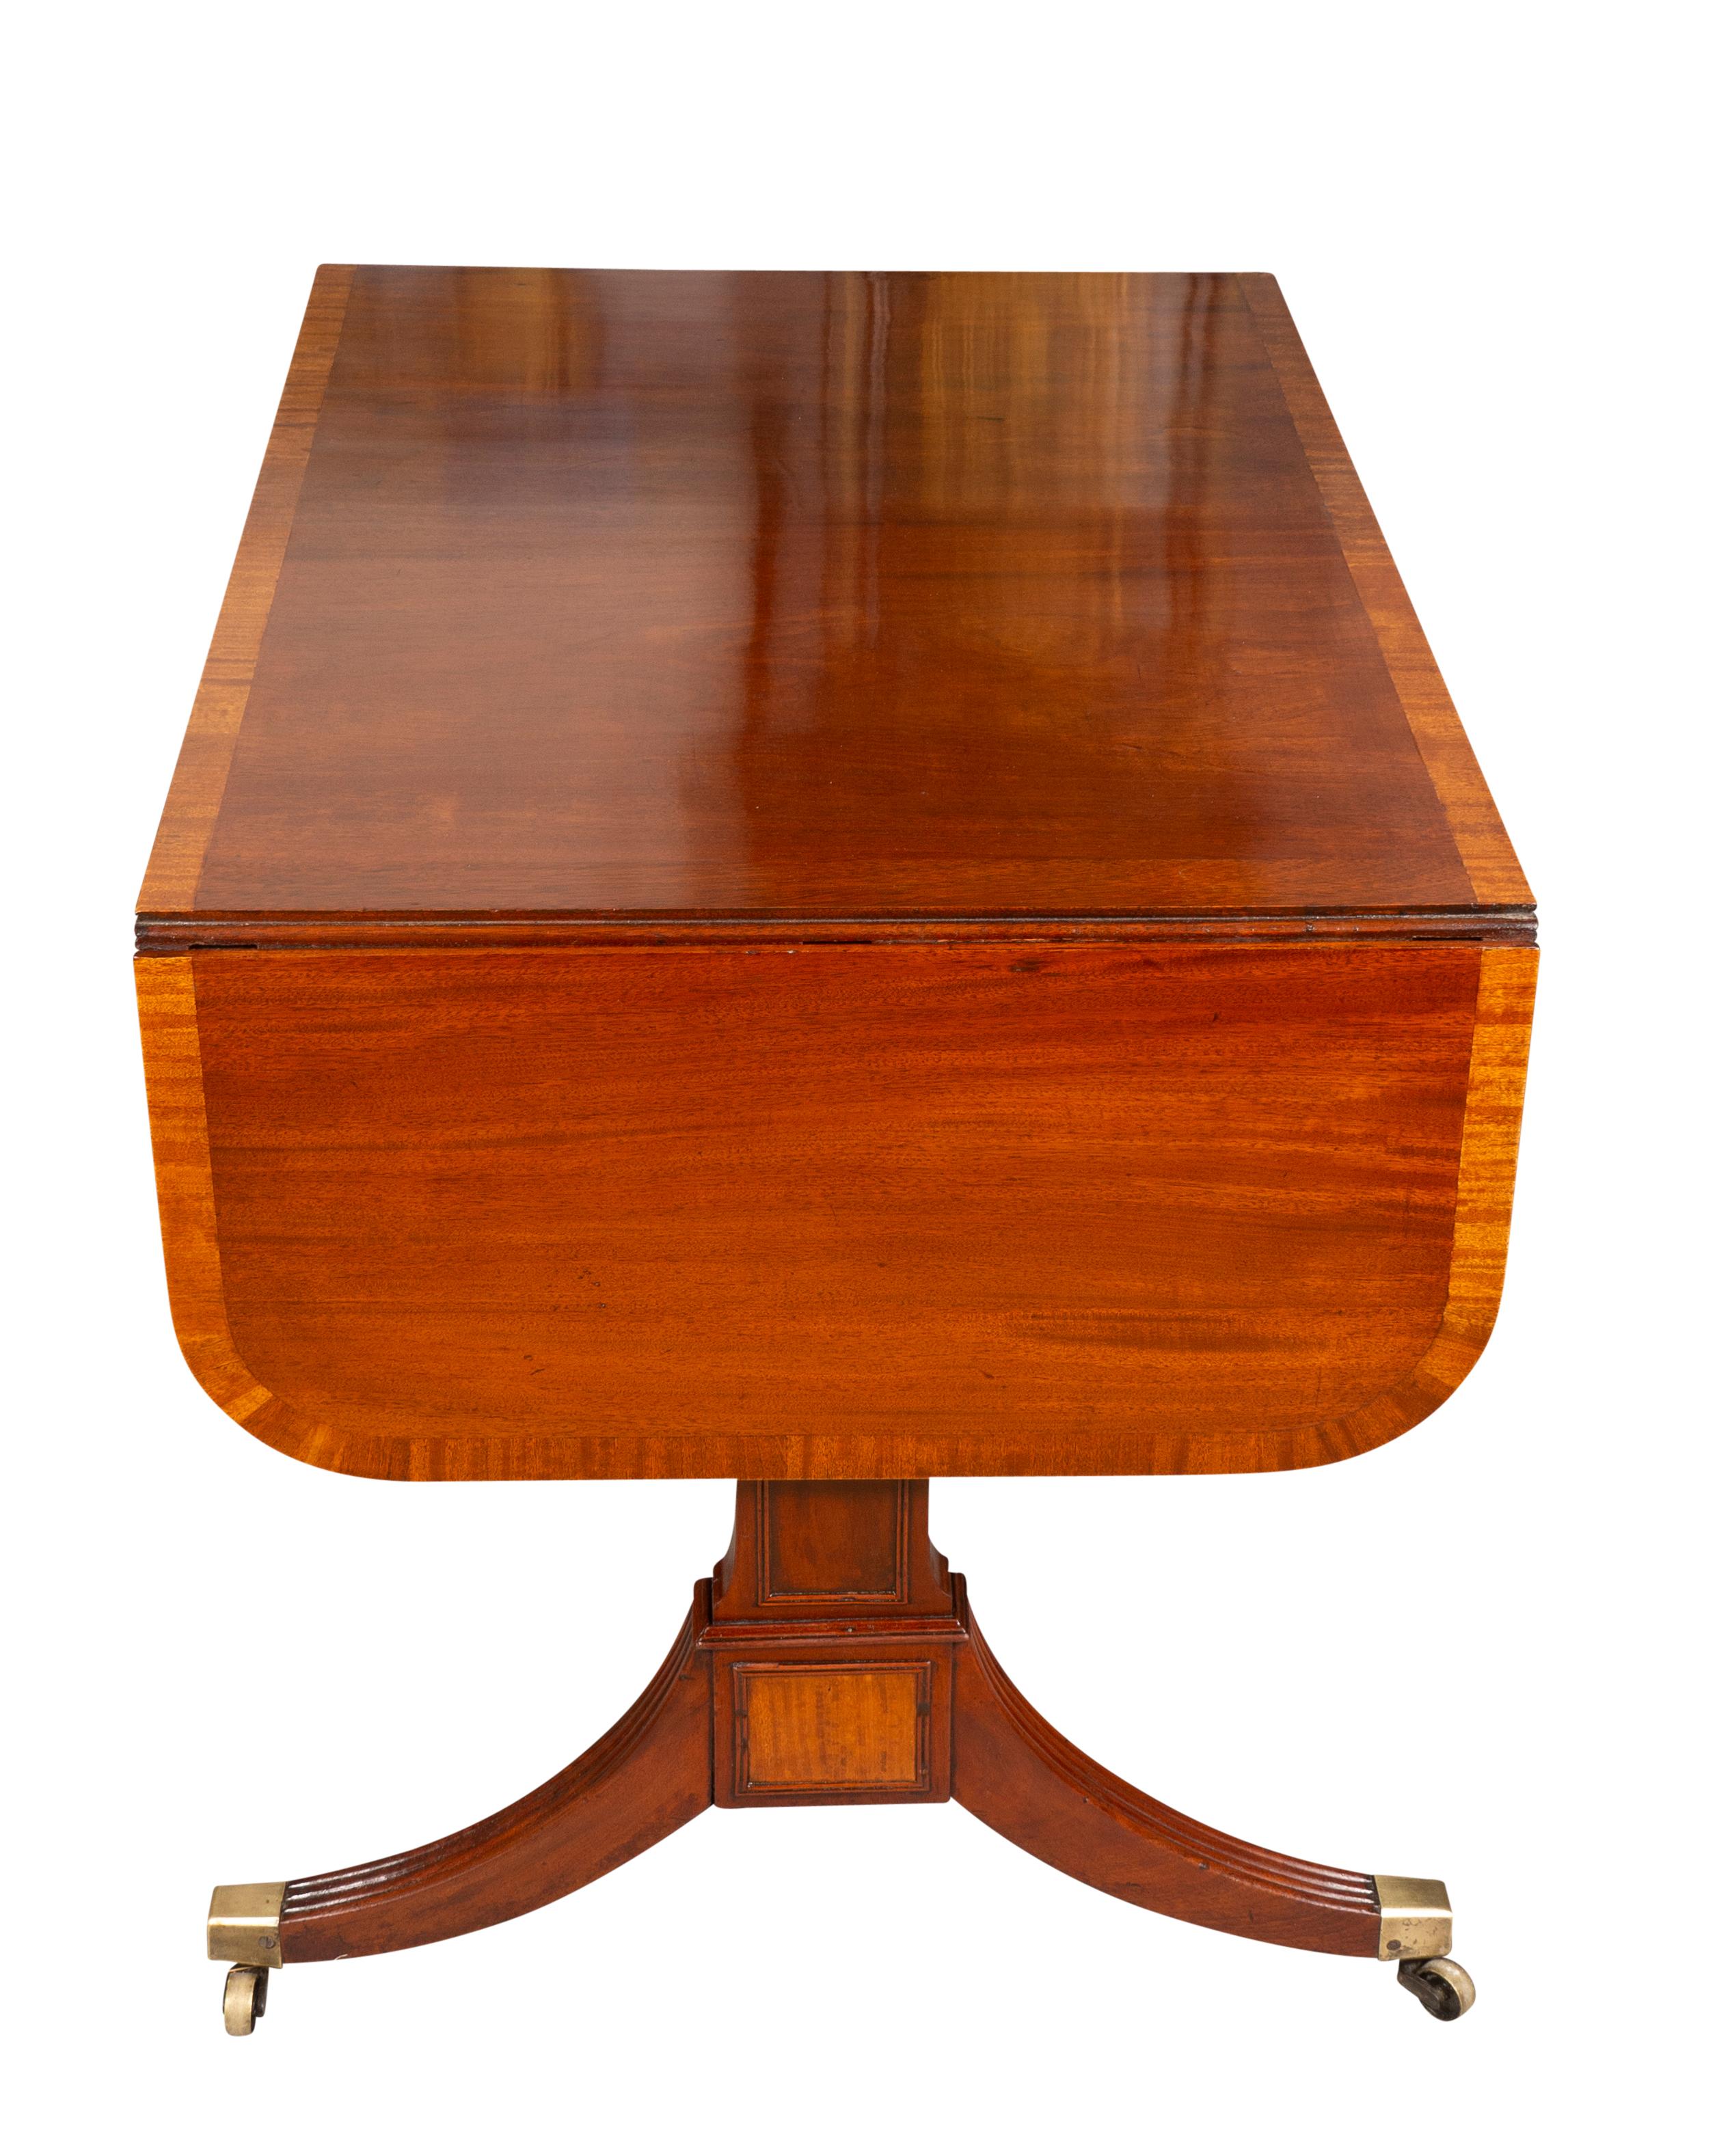 19th Century Regency Mahogany And Satinwood Sofa Table For Sale